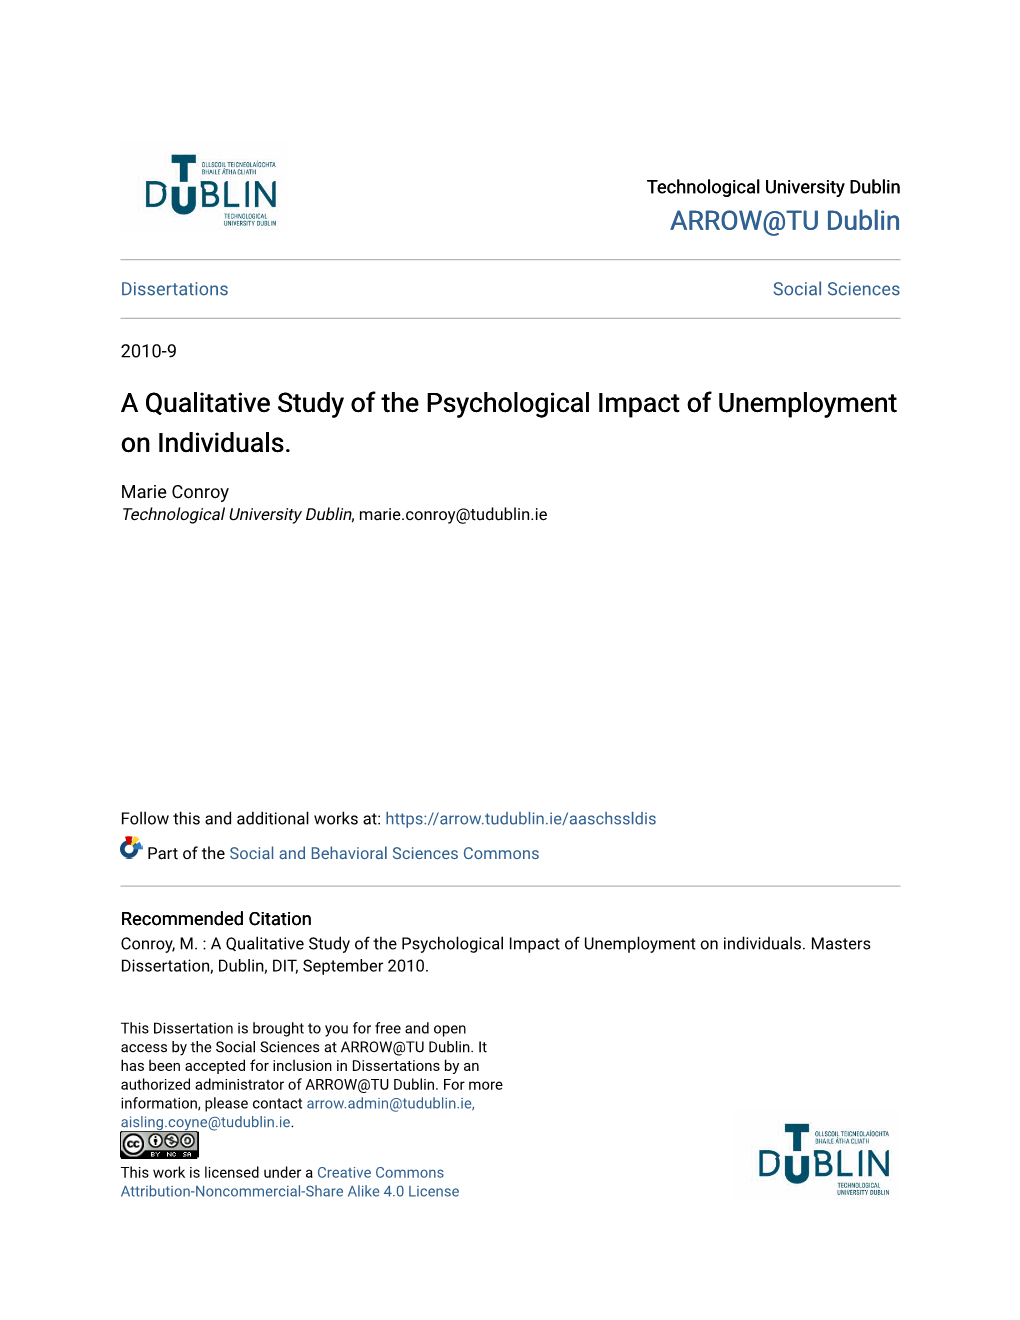 A Qualitative Study of the Psychological Impact of Unemployment on Individuals